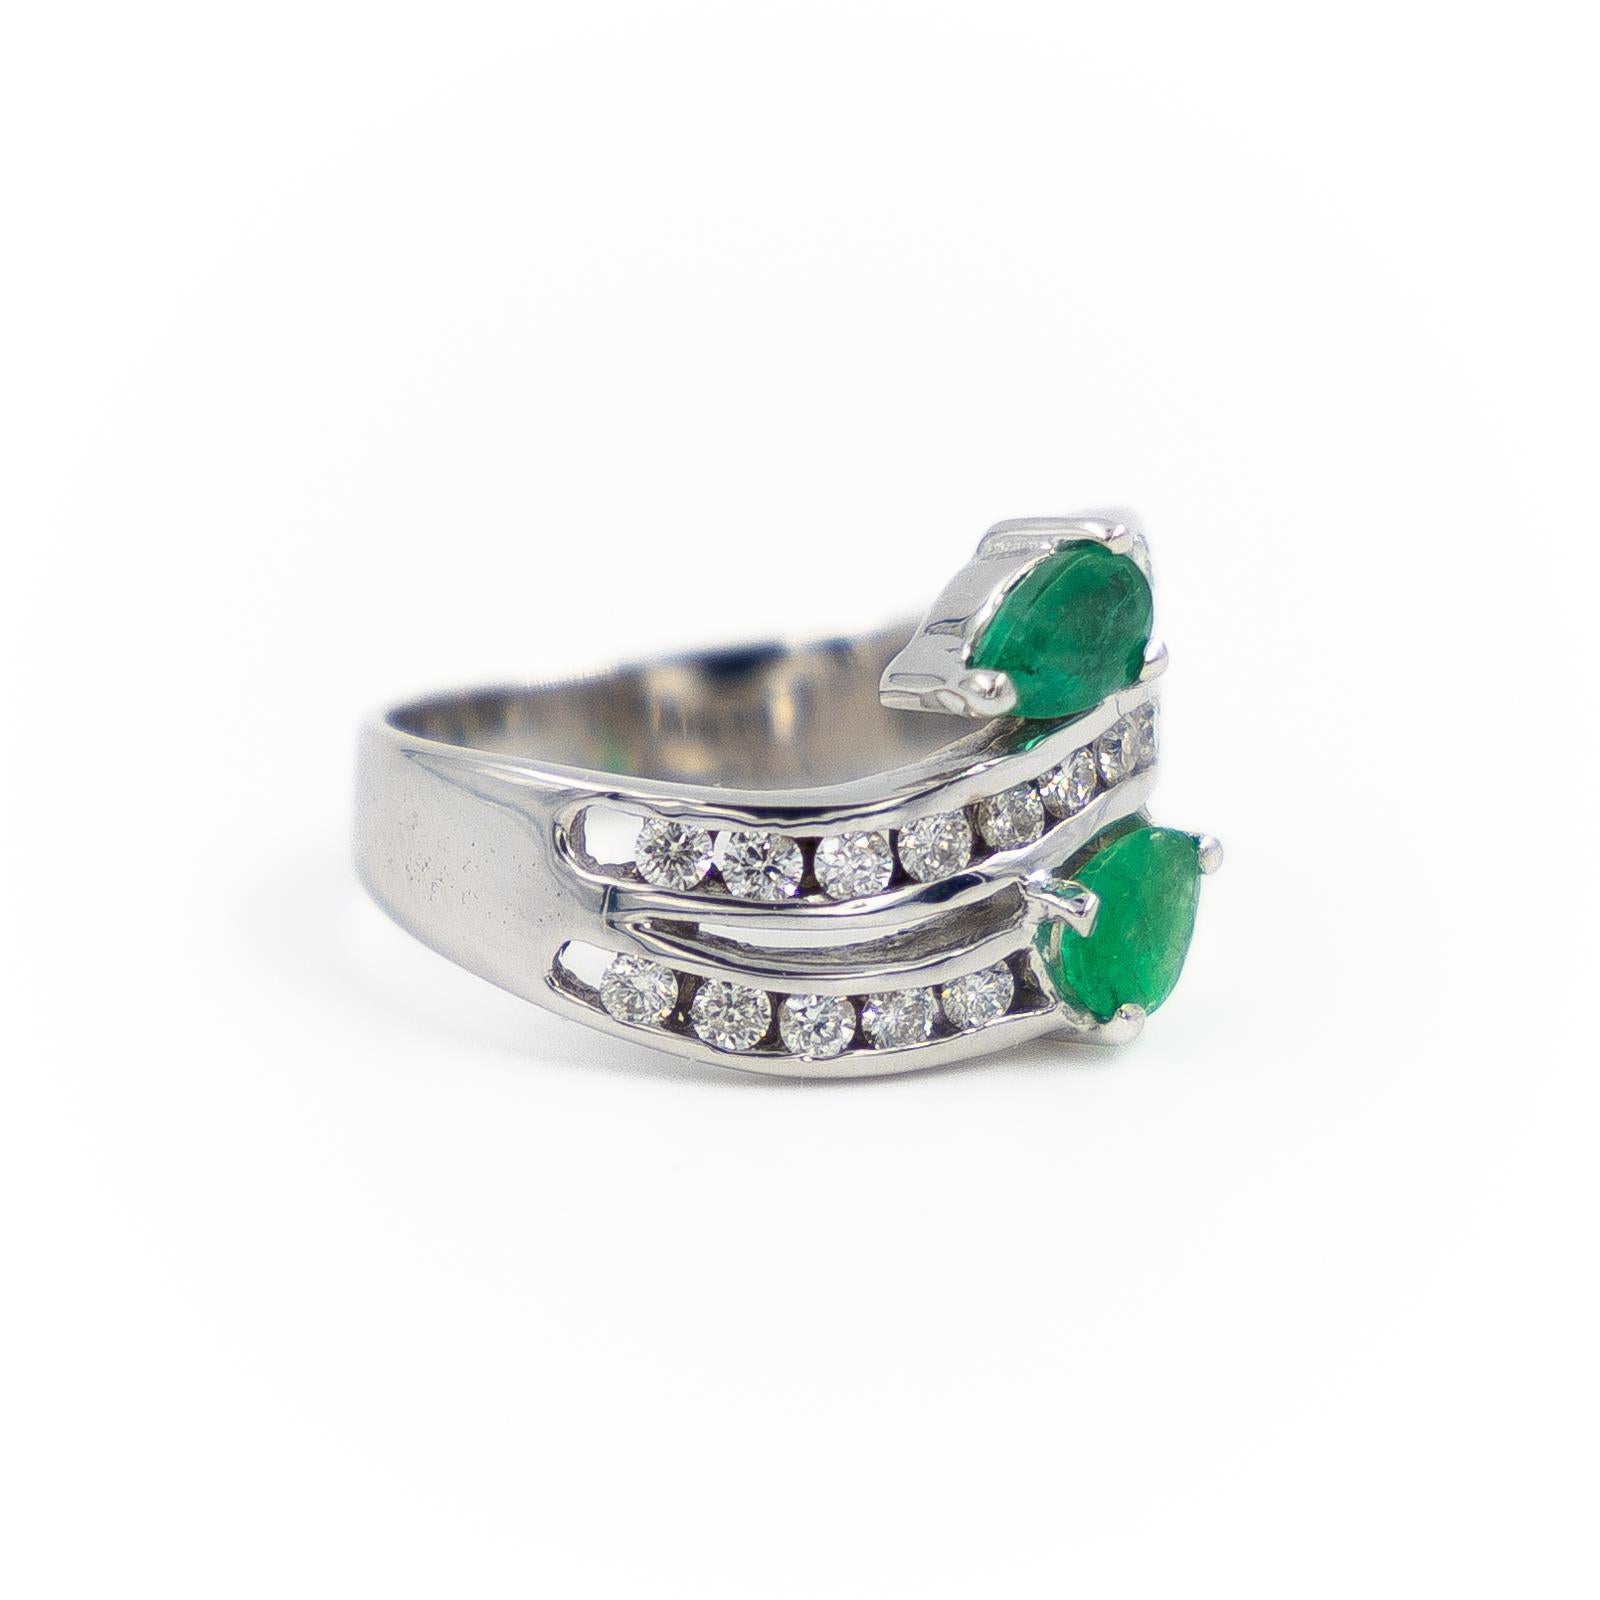 Ring you & me in white gold 750 thousandths (18 carats). set with 2 pear-cut emeralds one approximatively 0.22 ct and the other around 0.20 ct. paving of 21 diamonds brilliant size of approximately 0.01 ct each one. total weight of diamonds: 0.21